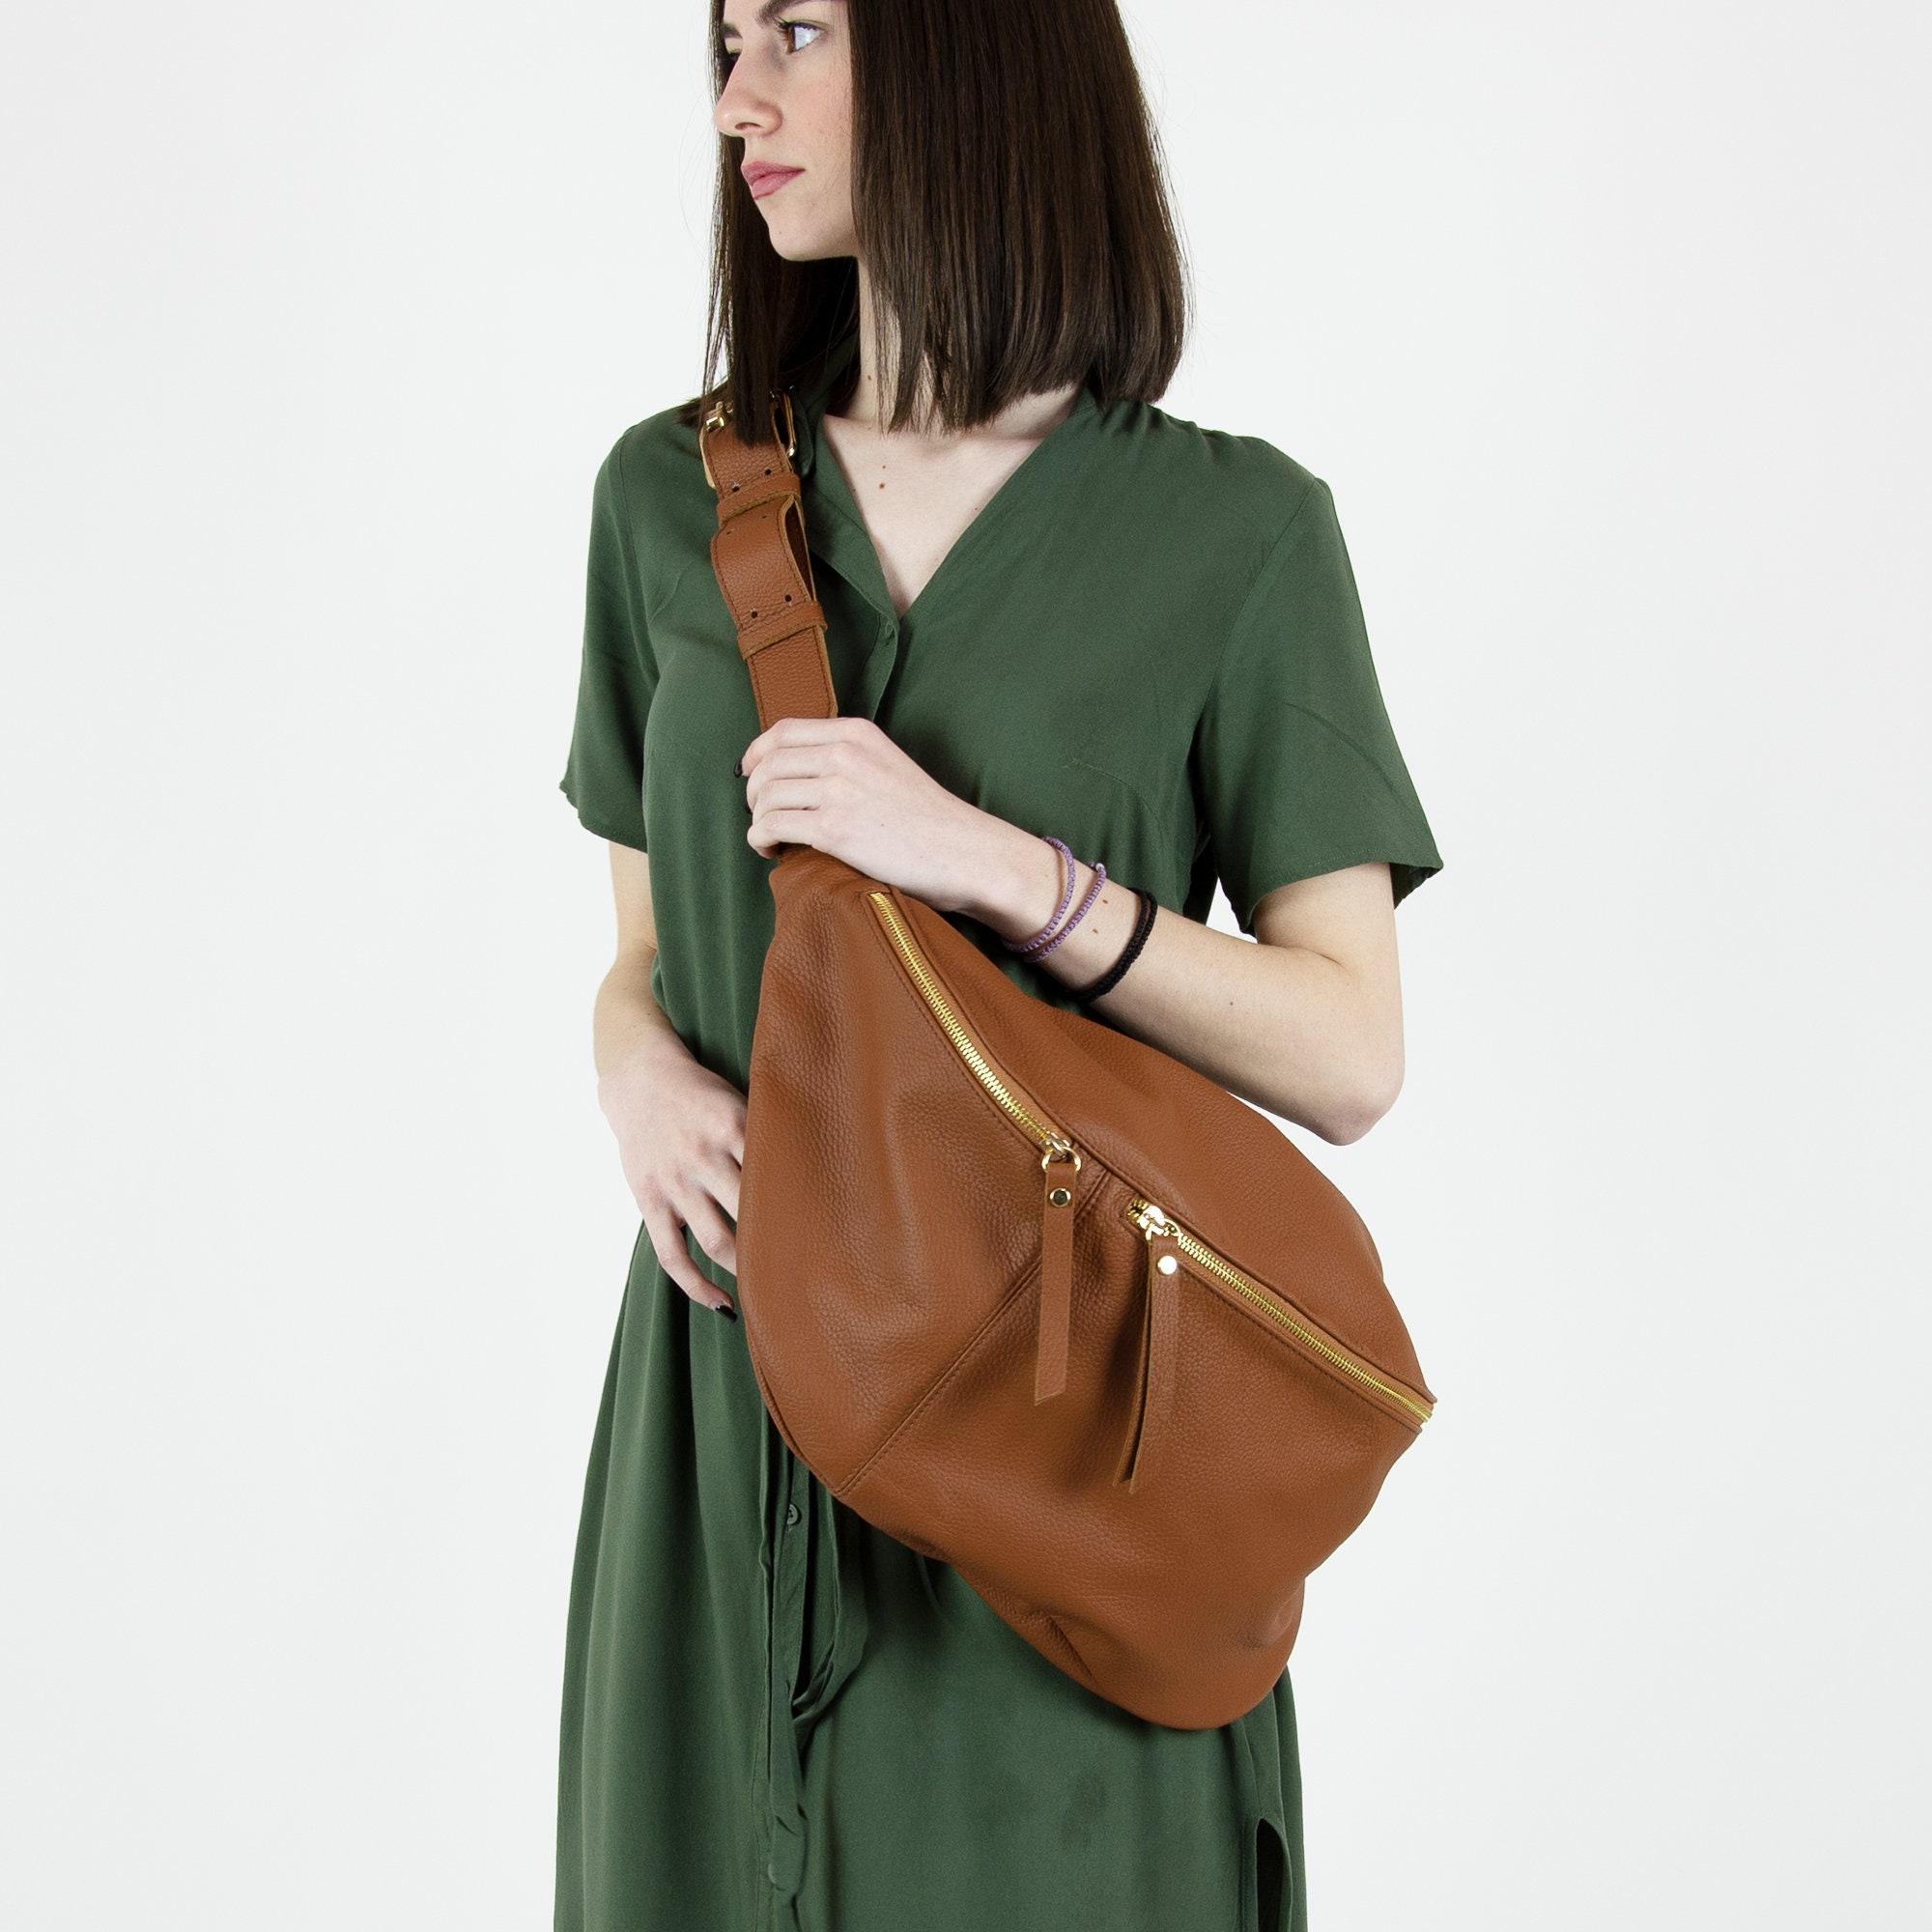 Looking for sling bag or large Fanny to wear crossbody : r/handbags